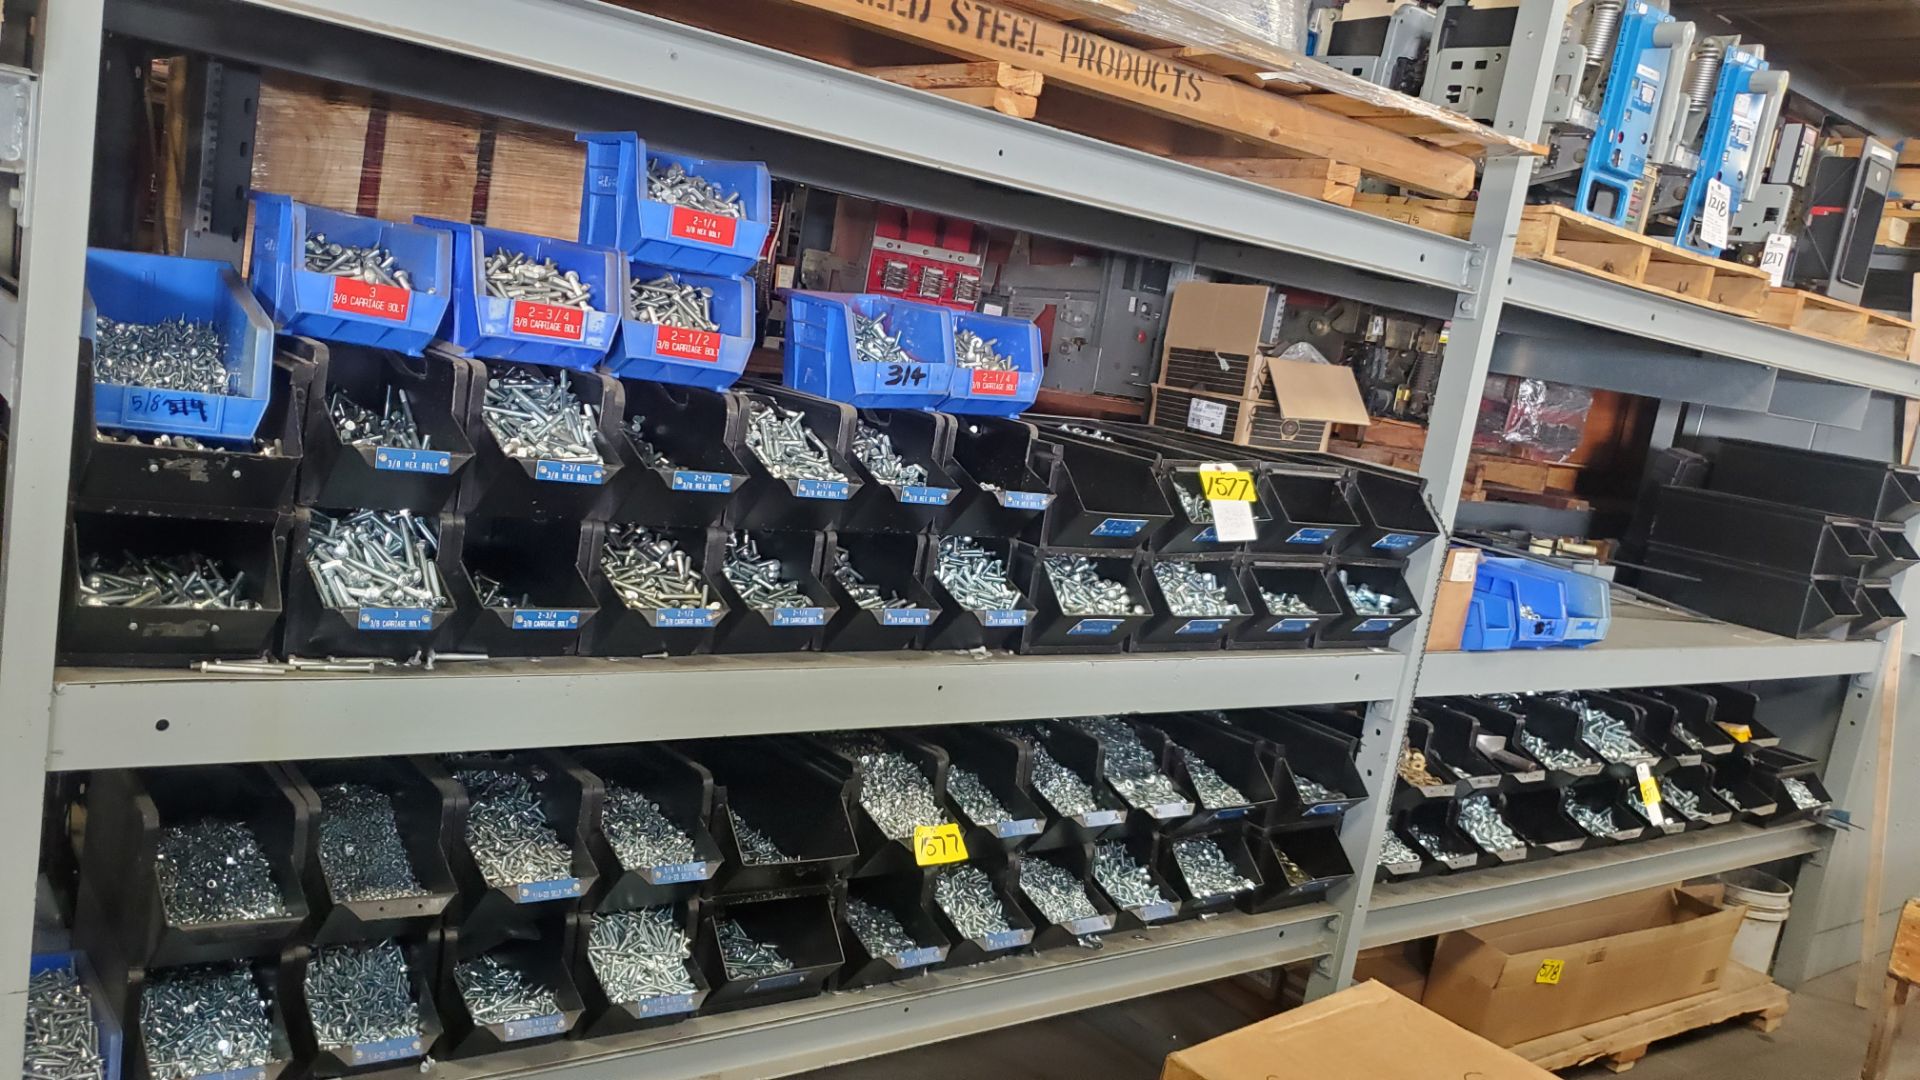 (Lot) Screws, Nuts, Bolts & Washers, 3/4, 5/16 3/8 & Others (LOADING FEES: $180)